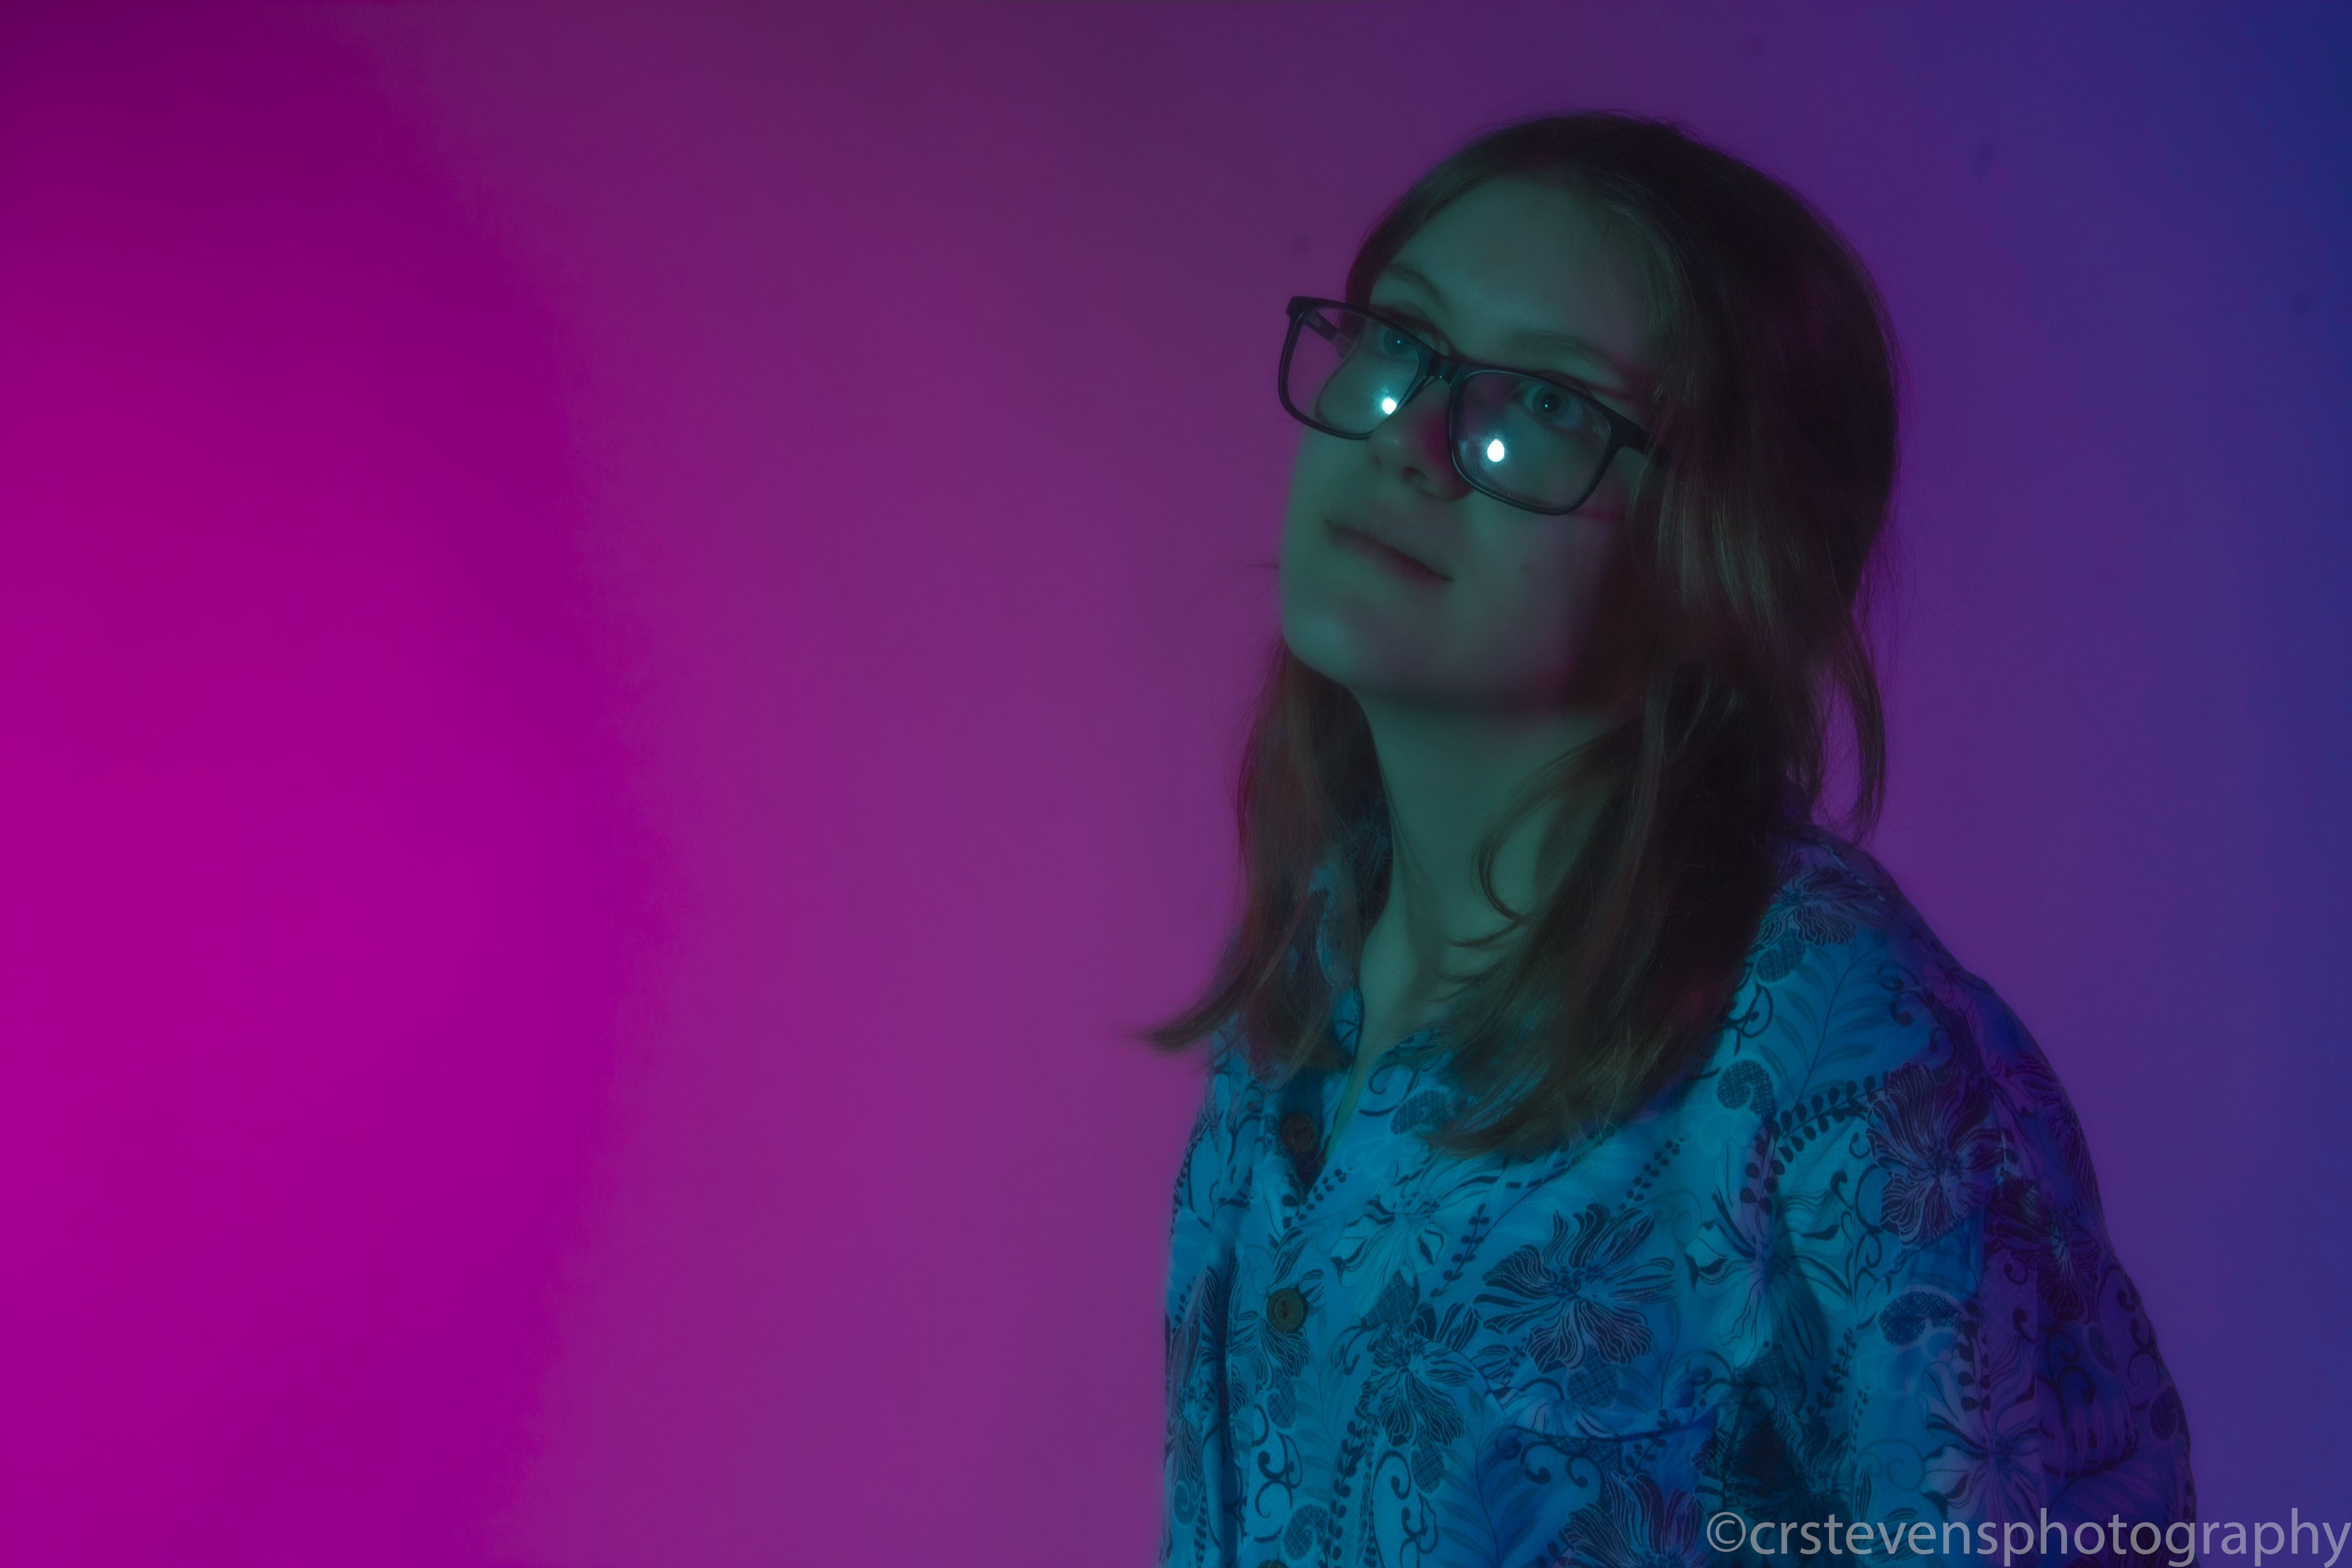 a person with a patterned shirt and glasses looking past the camera with their body turned away in bisexual lighting